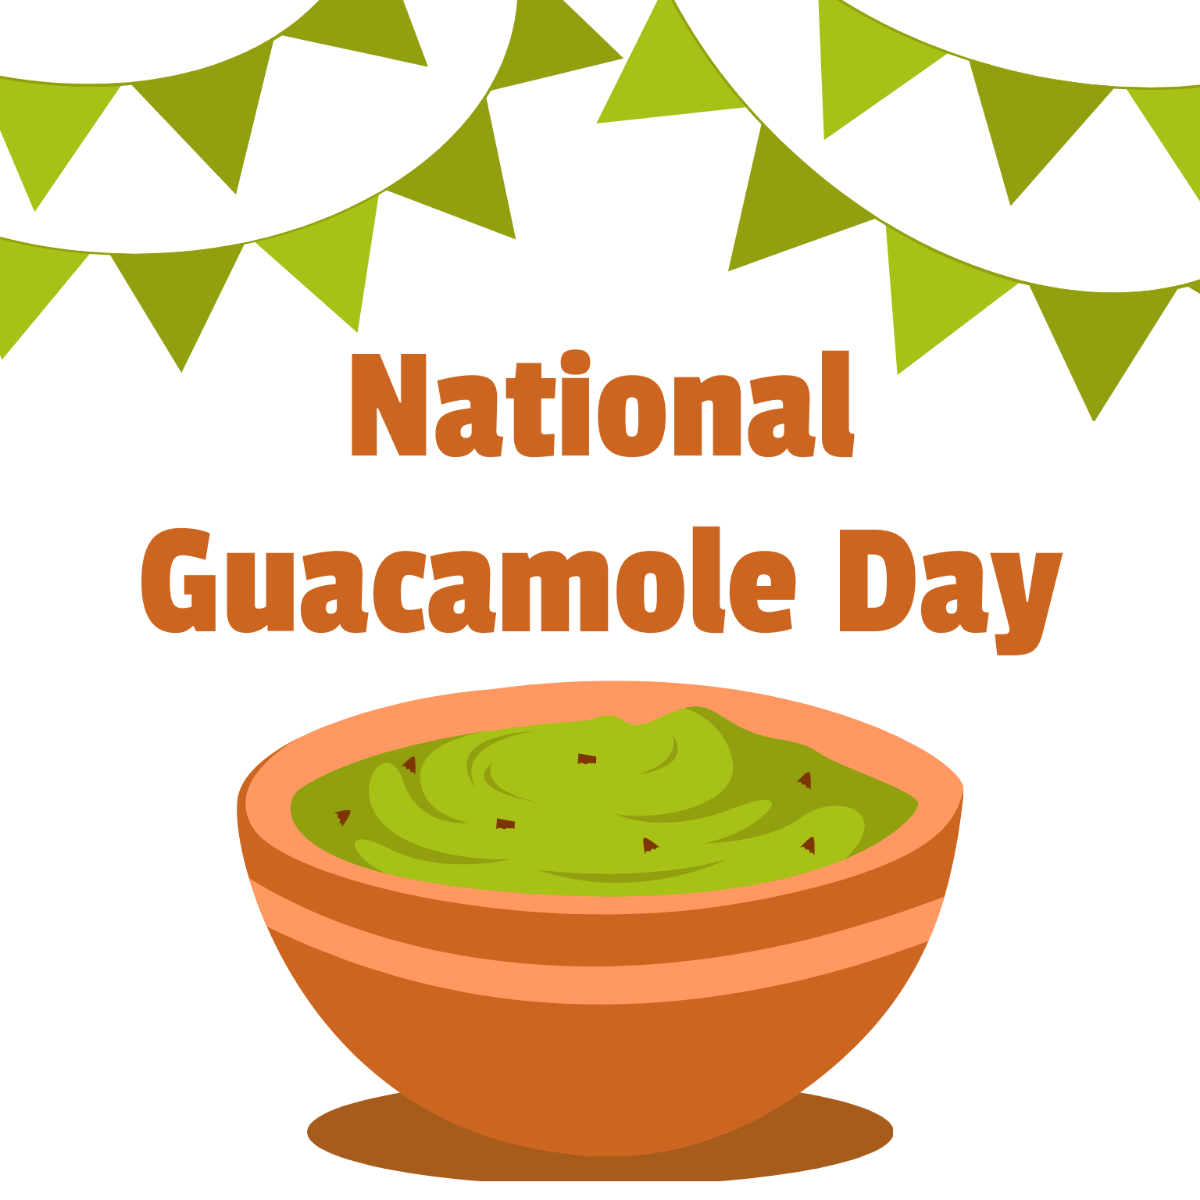 Free National Guacamole Day Illustration Template